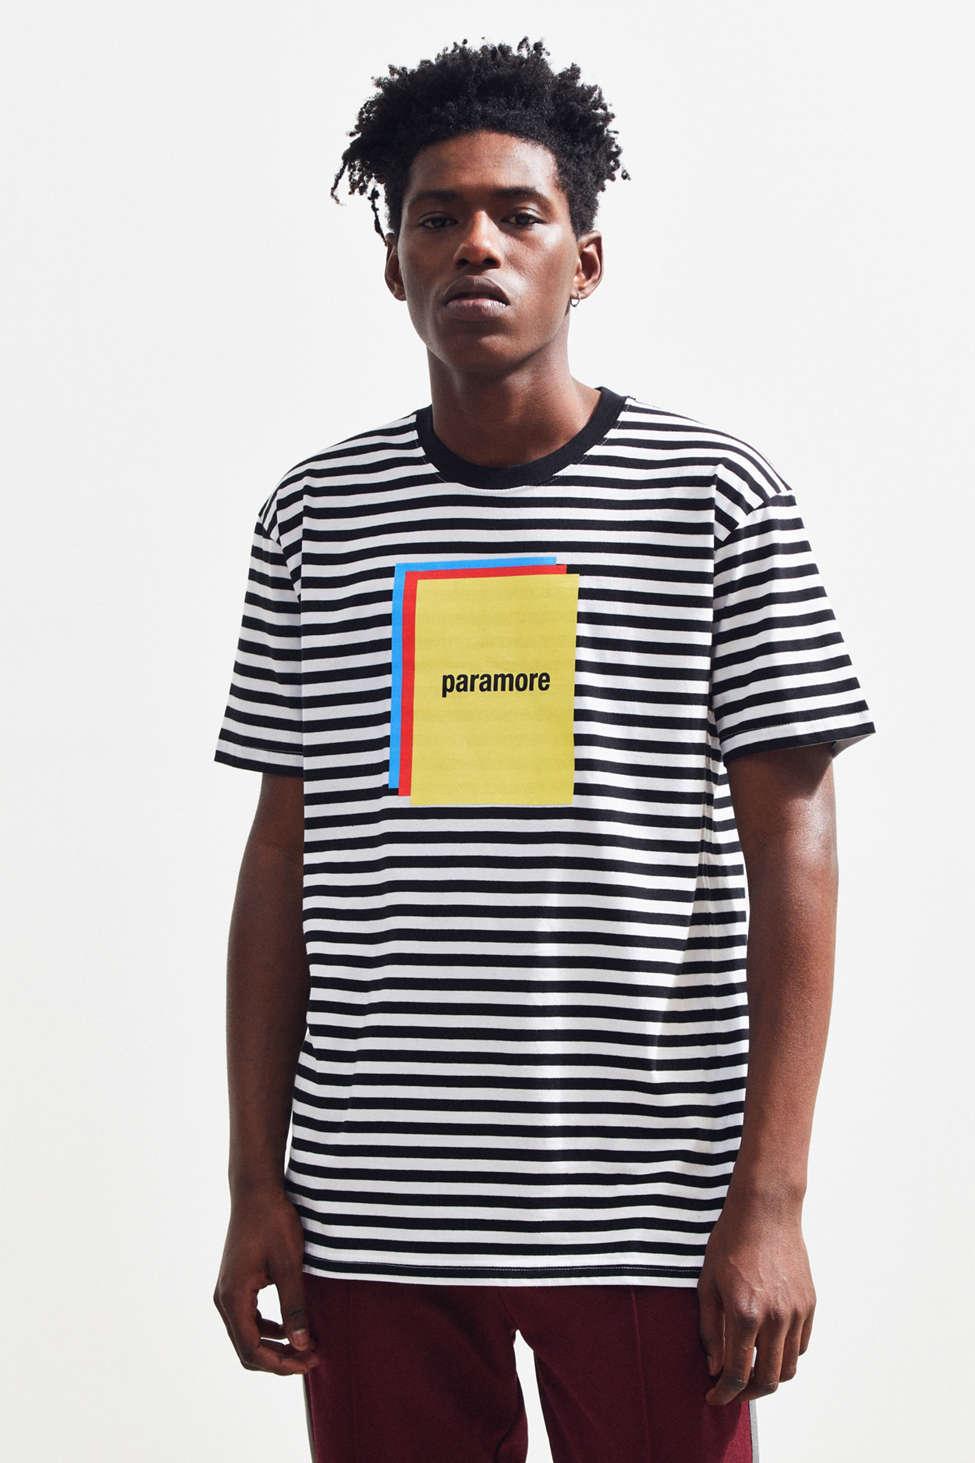 Lyst - Urban Outfitters Paramore Striped Color Block Tee in Black for Men